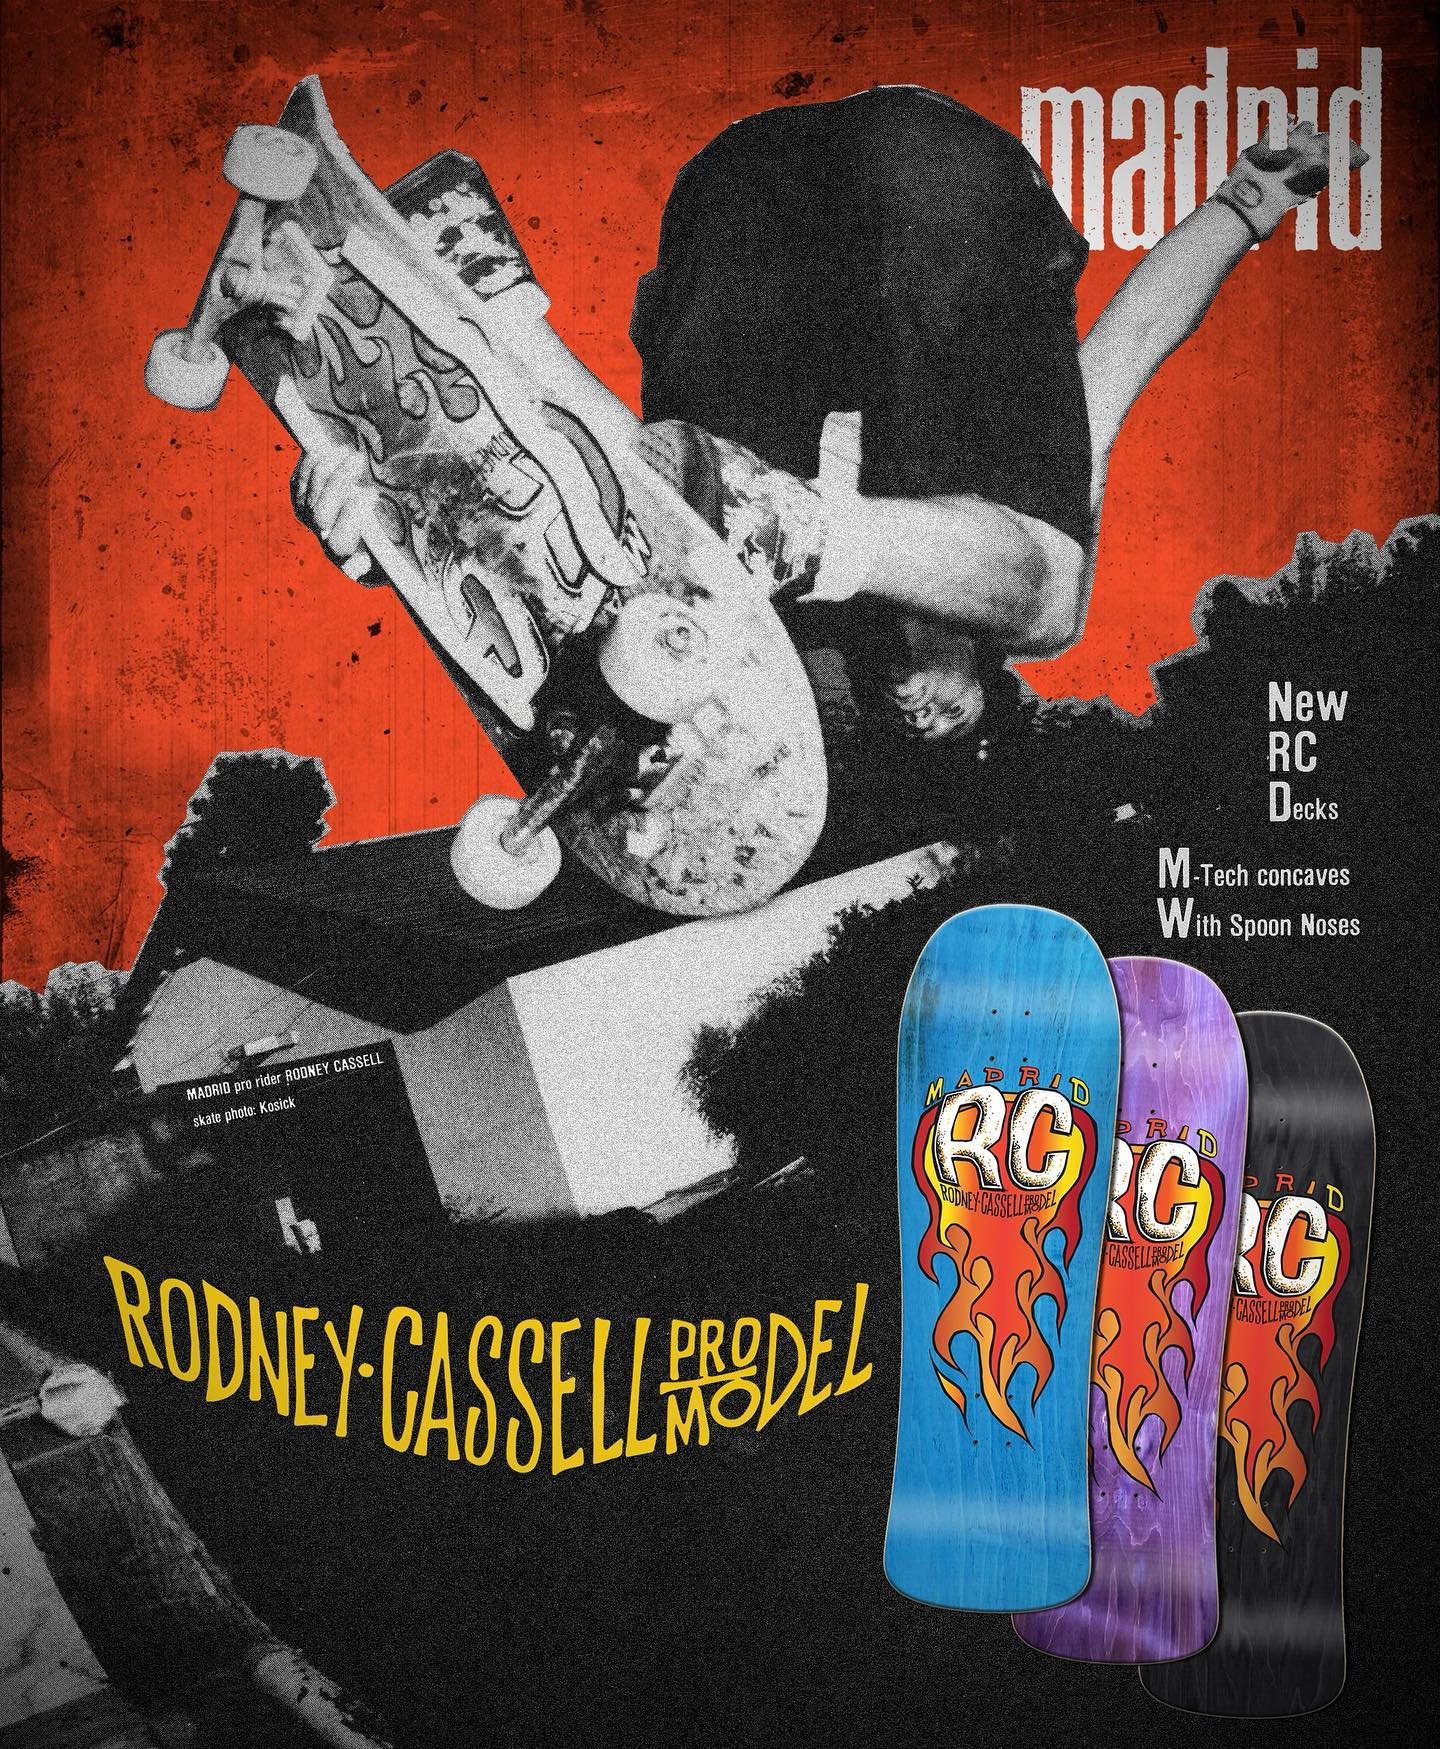 Big. Bold. The classic Rodney Cassell Fireball returns to the lineup, in a long overdue reissue. 

Part of our upcoming series focusing on never-before-re-released classics. 

Drop a comment with your top reissue wishes below, and hopefully we can ac